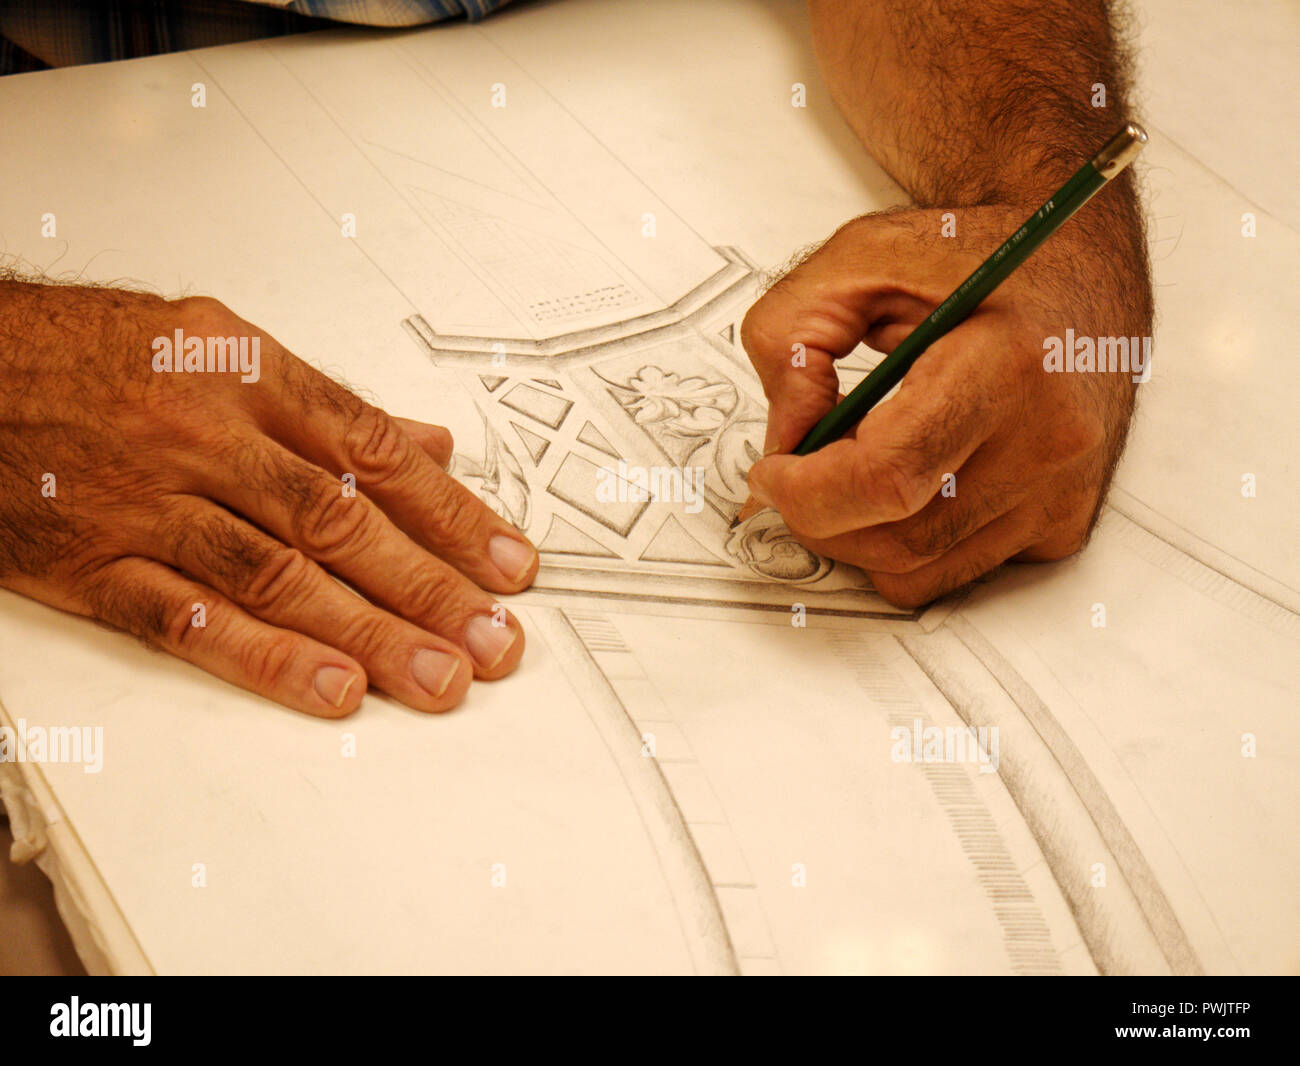 An artist  sketching out a design project.. Stock Photo